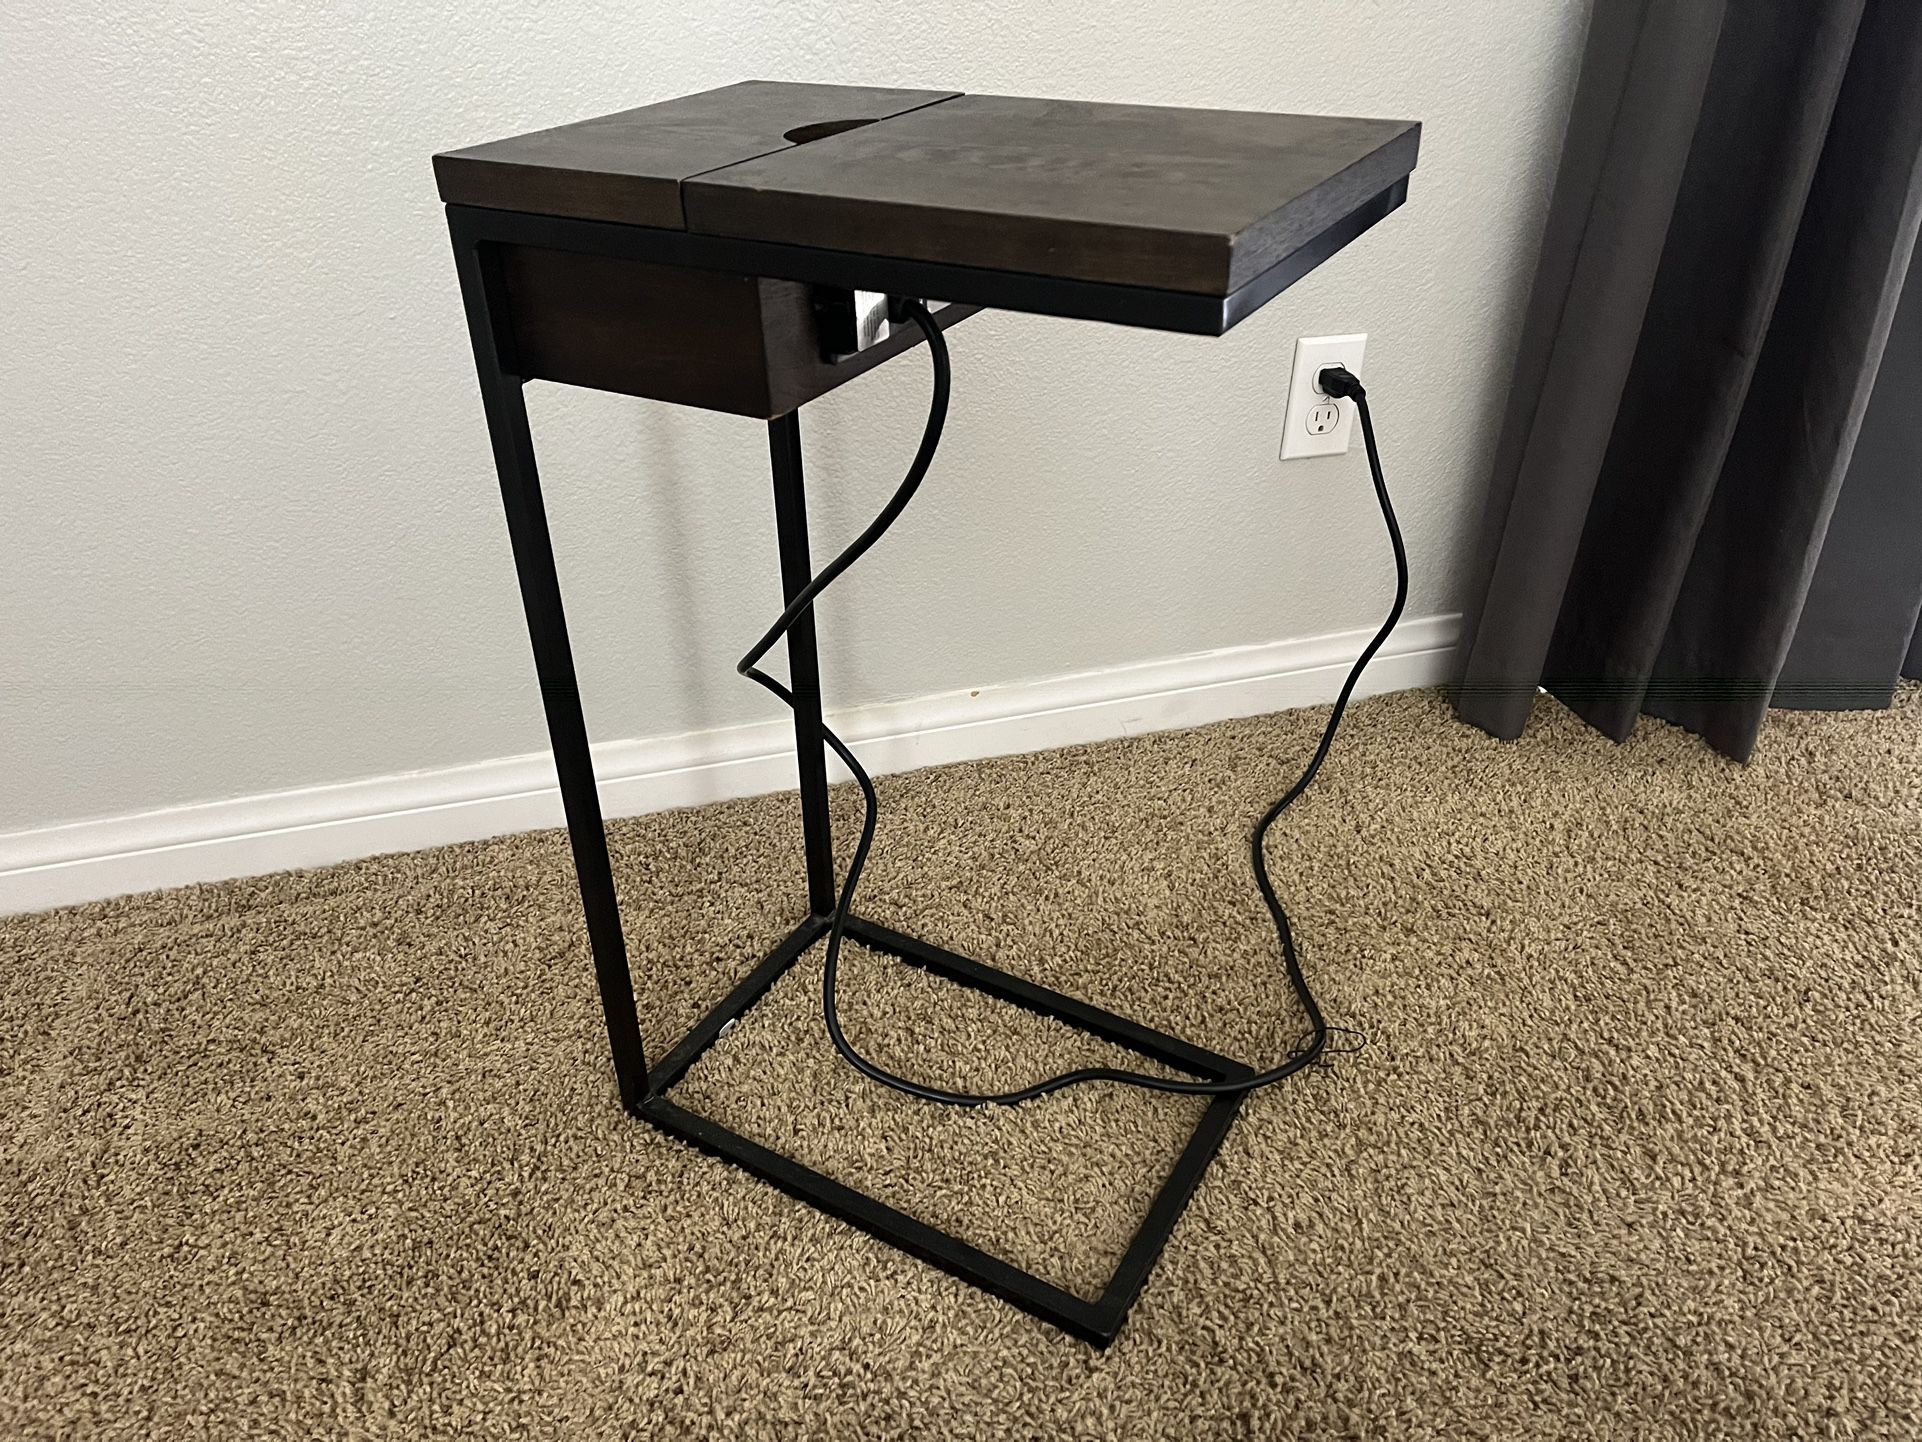 End Table/Nightstand + USB outlets